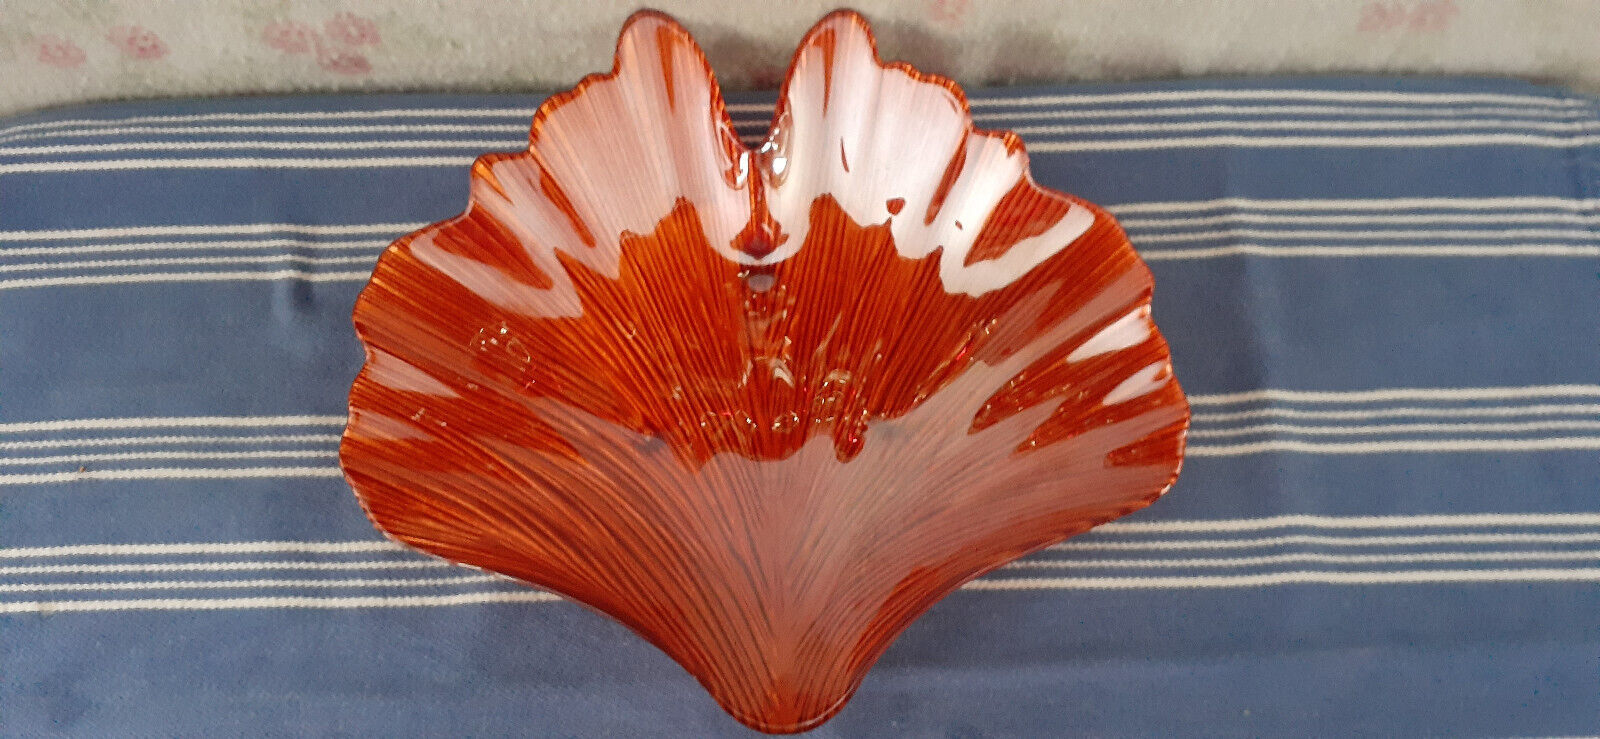 Primary image for Orange Leaf Candy Dish